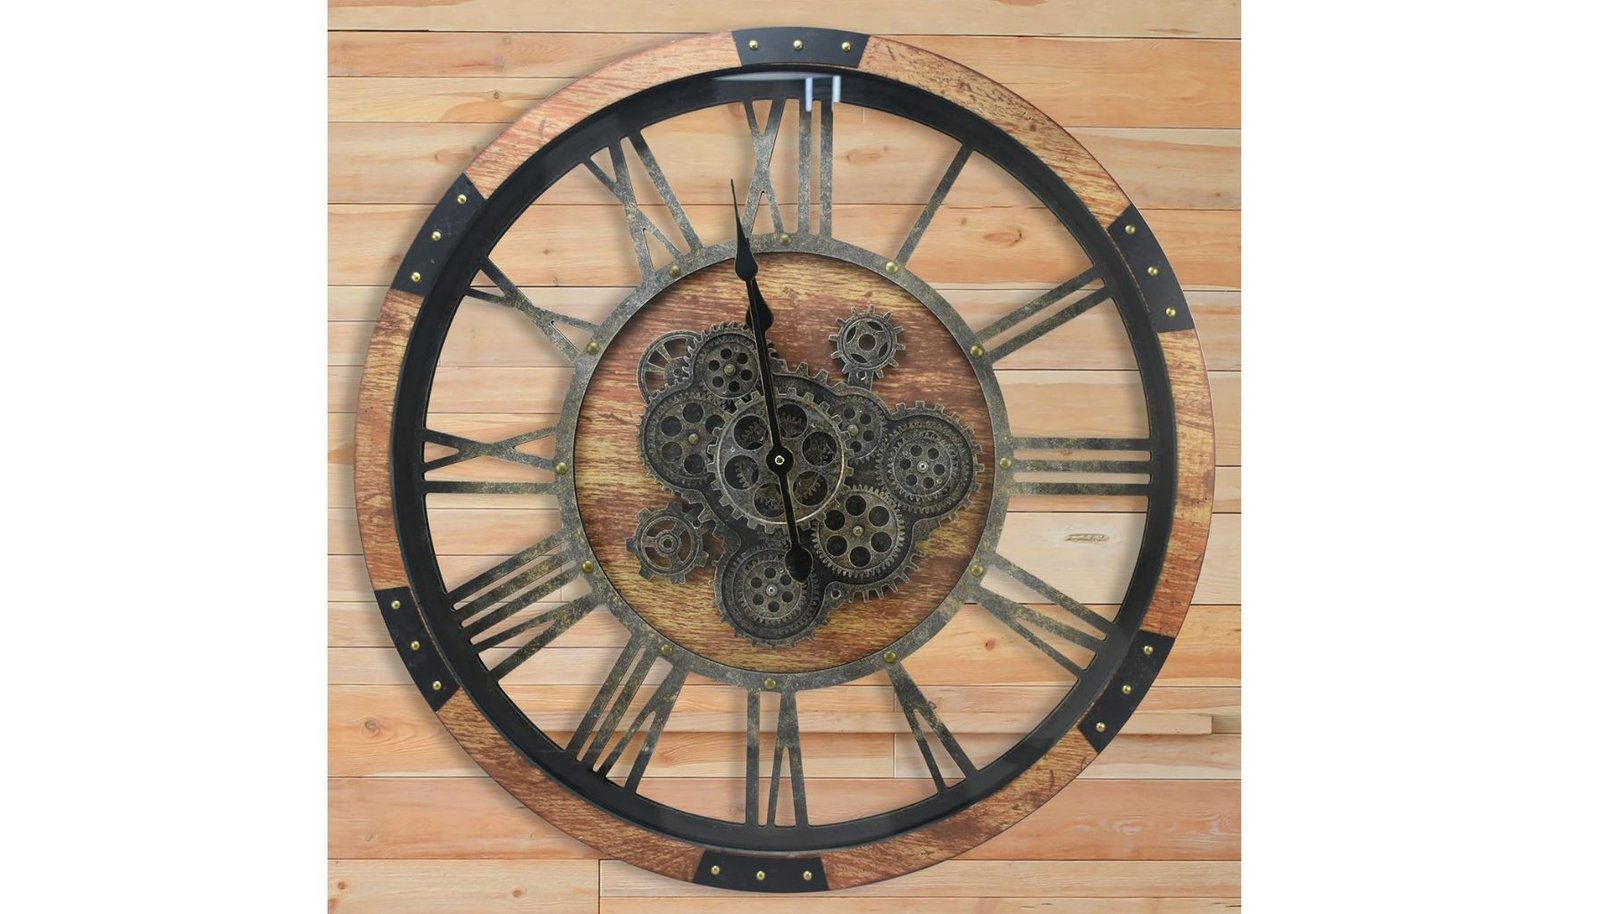 DORBOKER 27-inch Vintage Gears Living Room Wall Clock Review